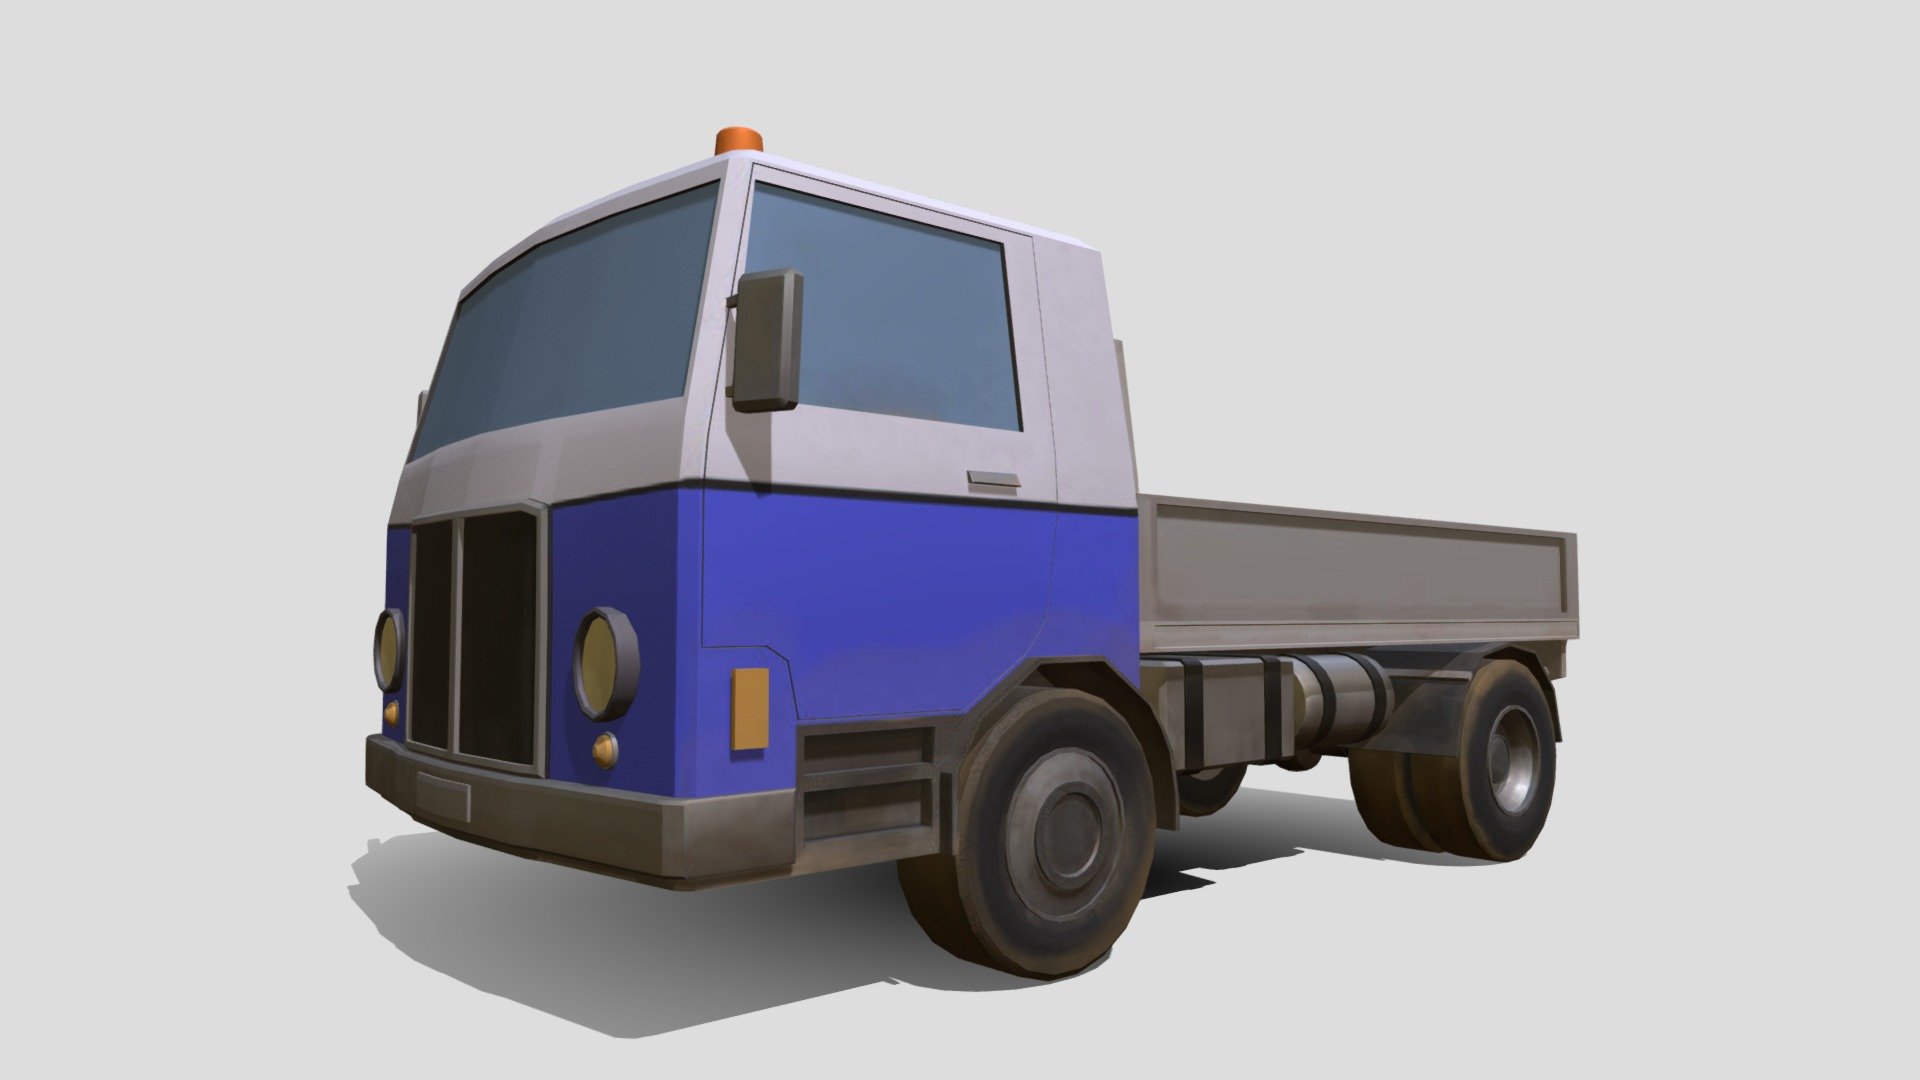 Low Poly Truck with hand painted textures- Diffuse, Metal, Roughness, The model uses a single texture atlas that is of 2k resolution. The model are made in Blender, textures mainly in Blender in combination with Affinity Photo. The vehicle are inspired by real world model with a realistic scale, but the style have been kept as &ldquo;LowPoly